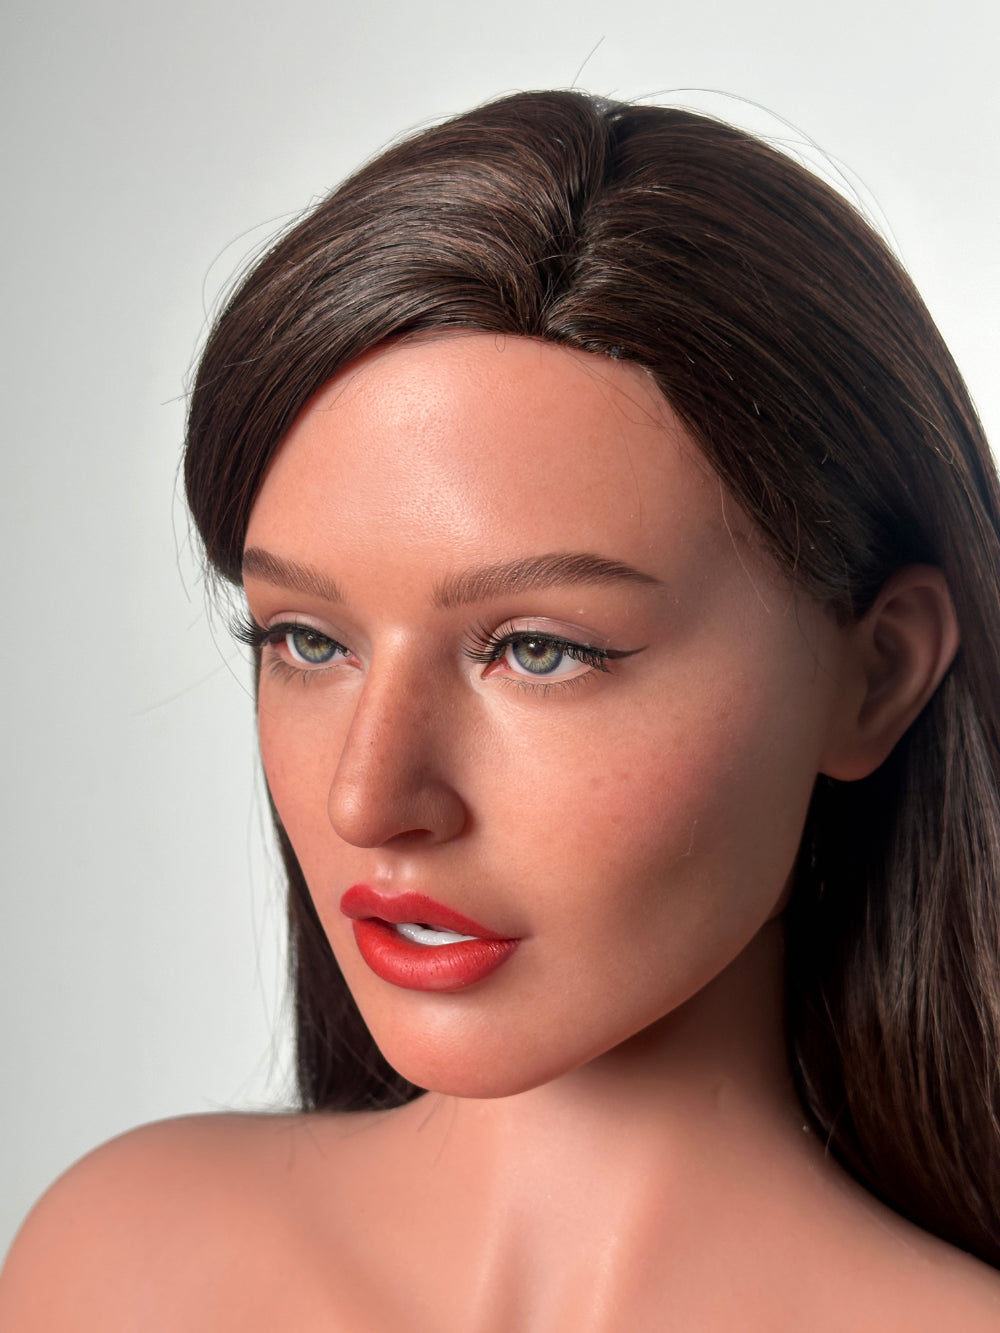 Zelex Doll SLE Series 171 cm C Silicone - ZXE212-1 Movable Jaw